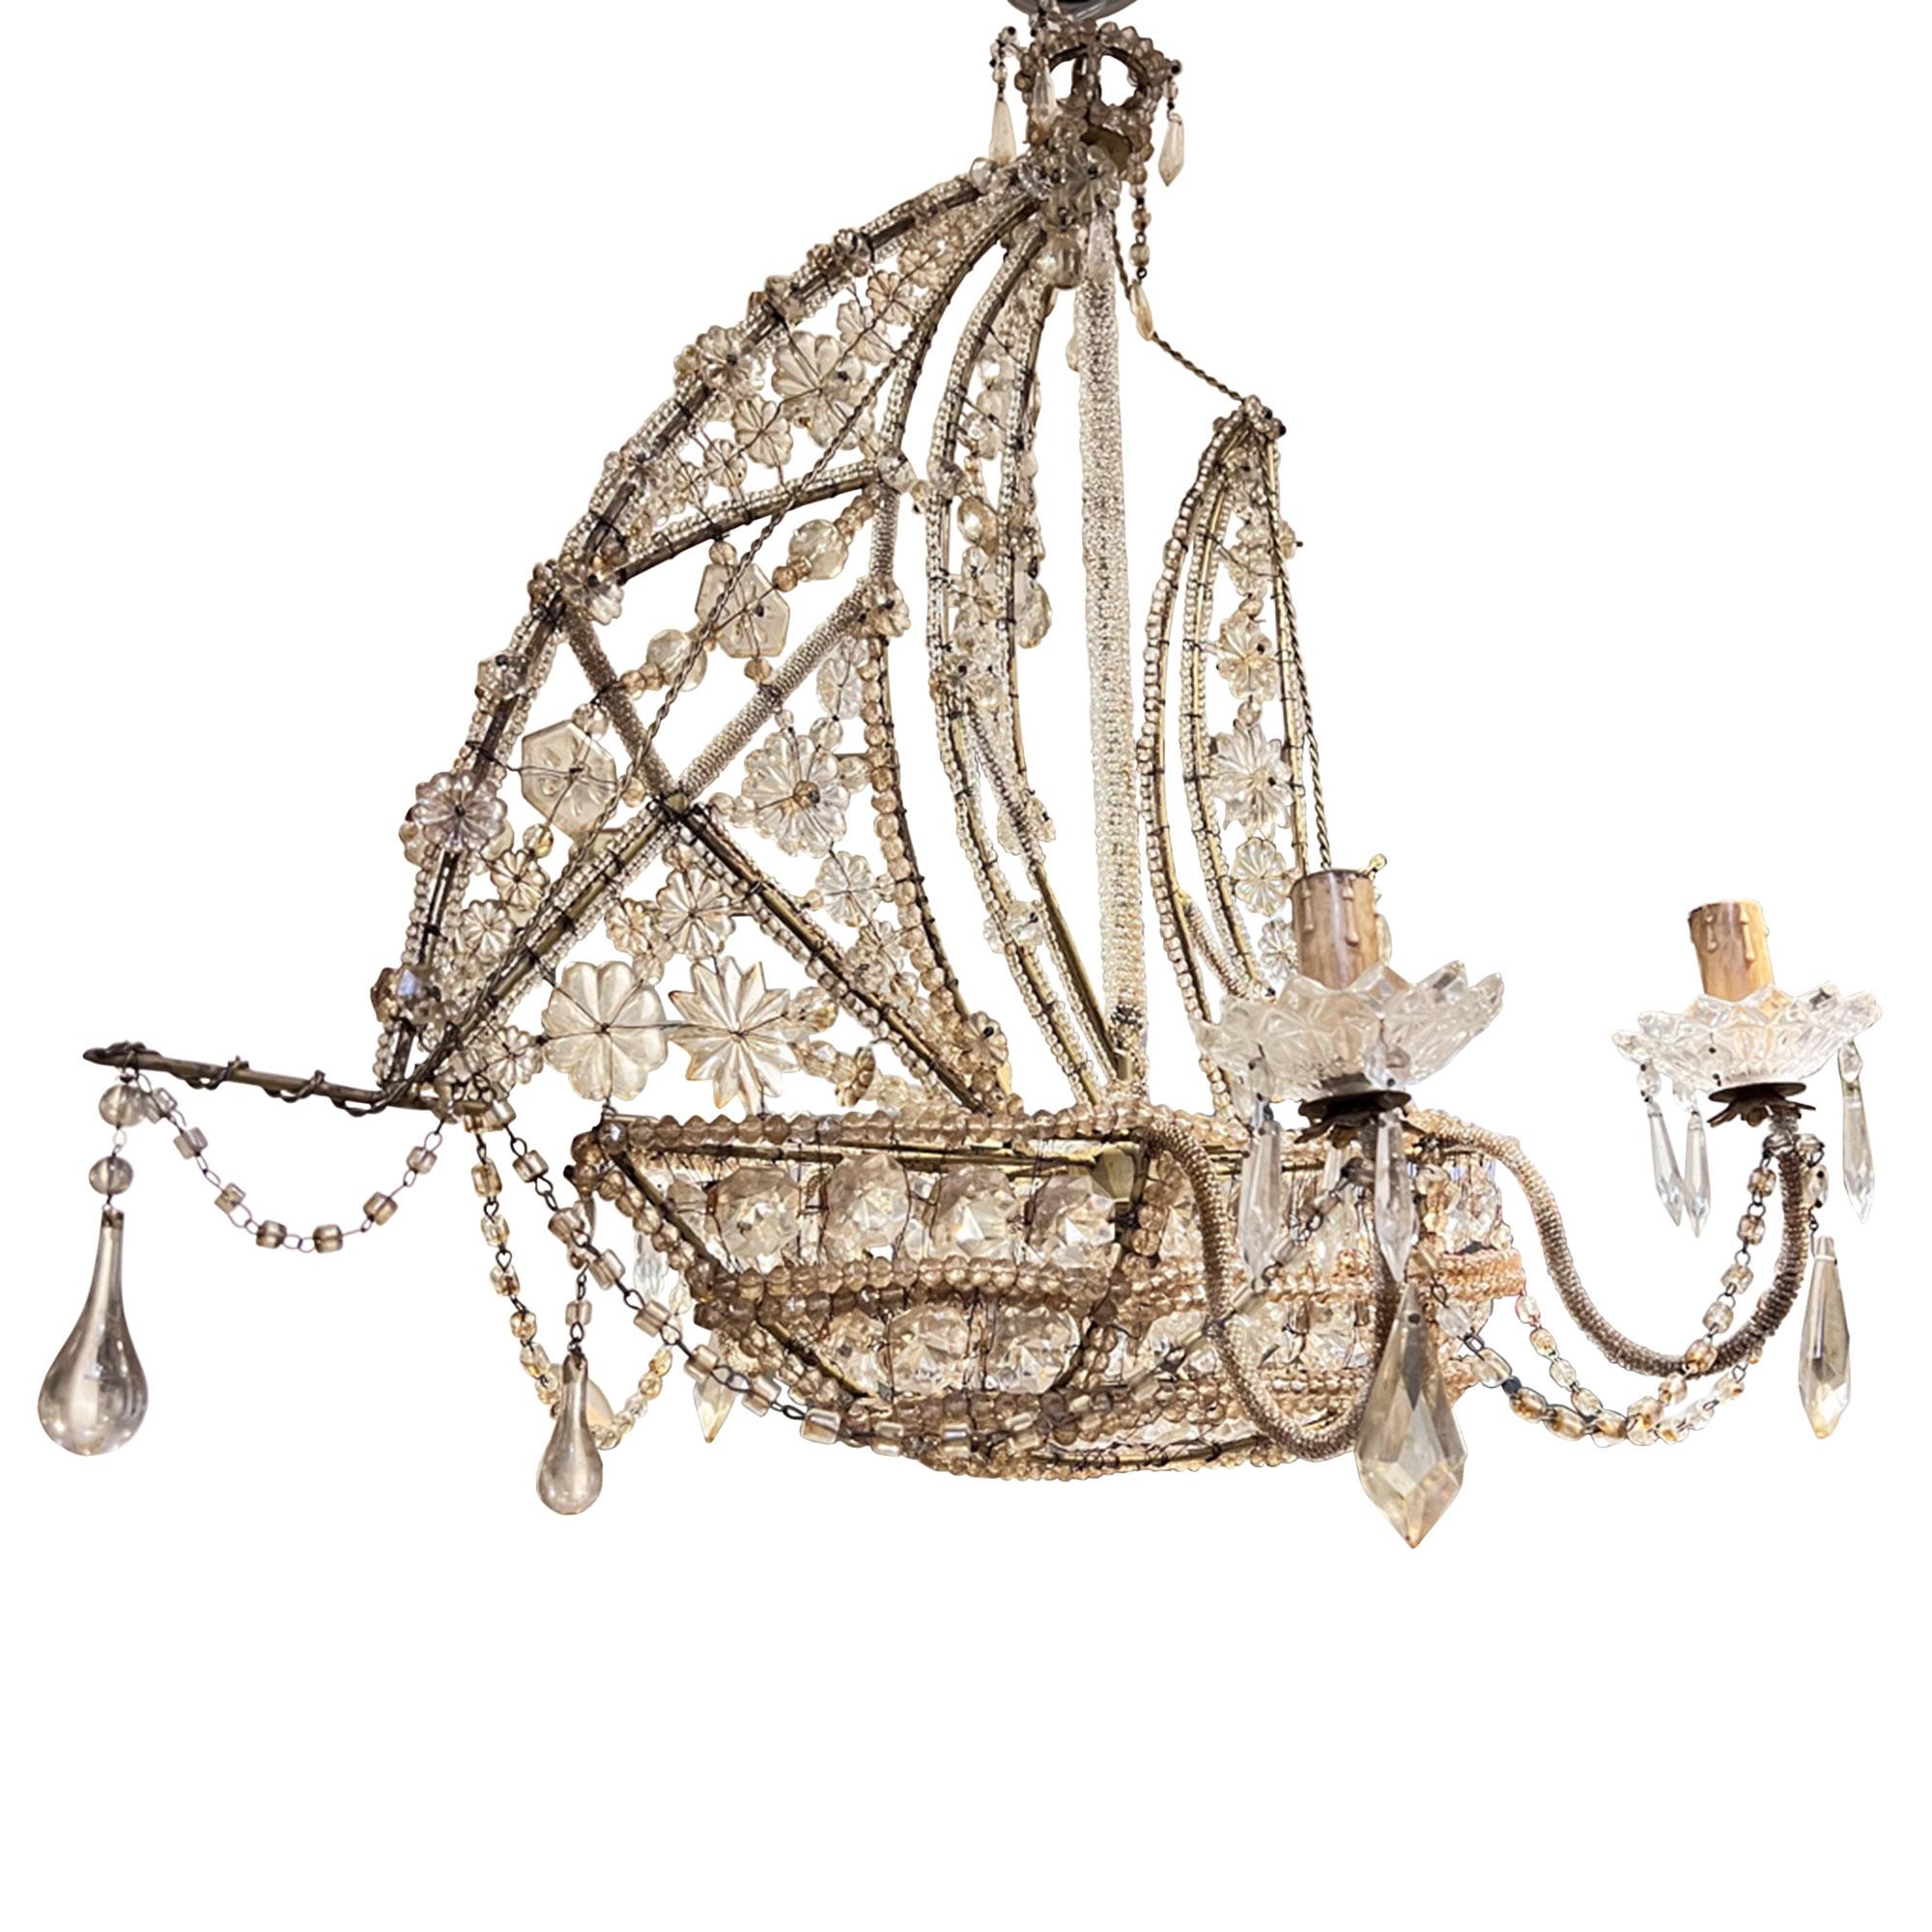 This very decorative chandelier was hand made in Italy in the 1950s. It has beautiful beaded detail to create the hull, rigging and sails, with an interesting crow's nest at the top of the mast - which is covered in tiny beads. Take a look at all